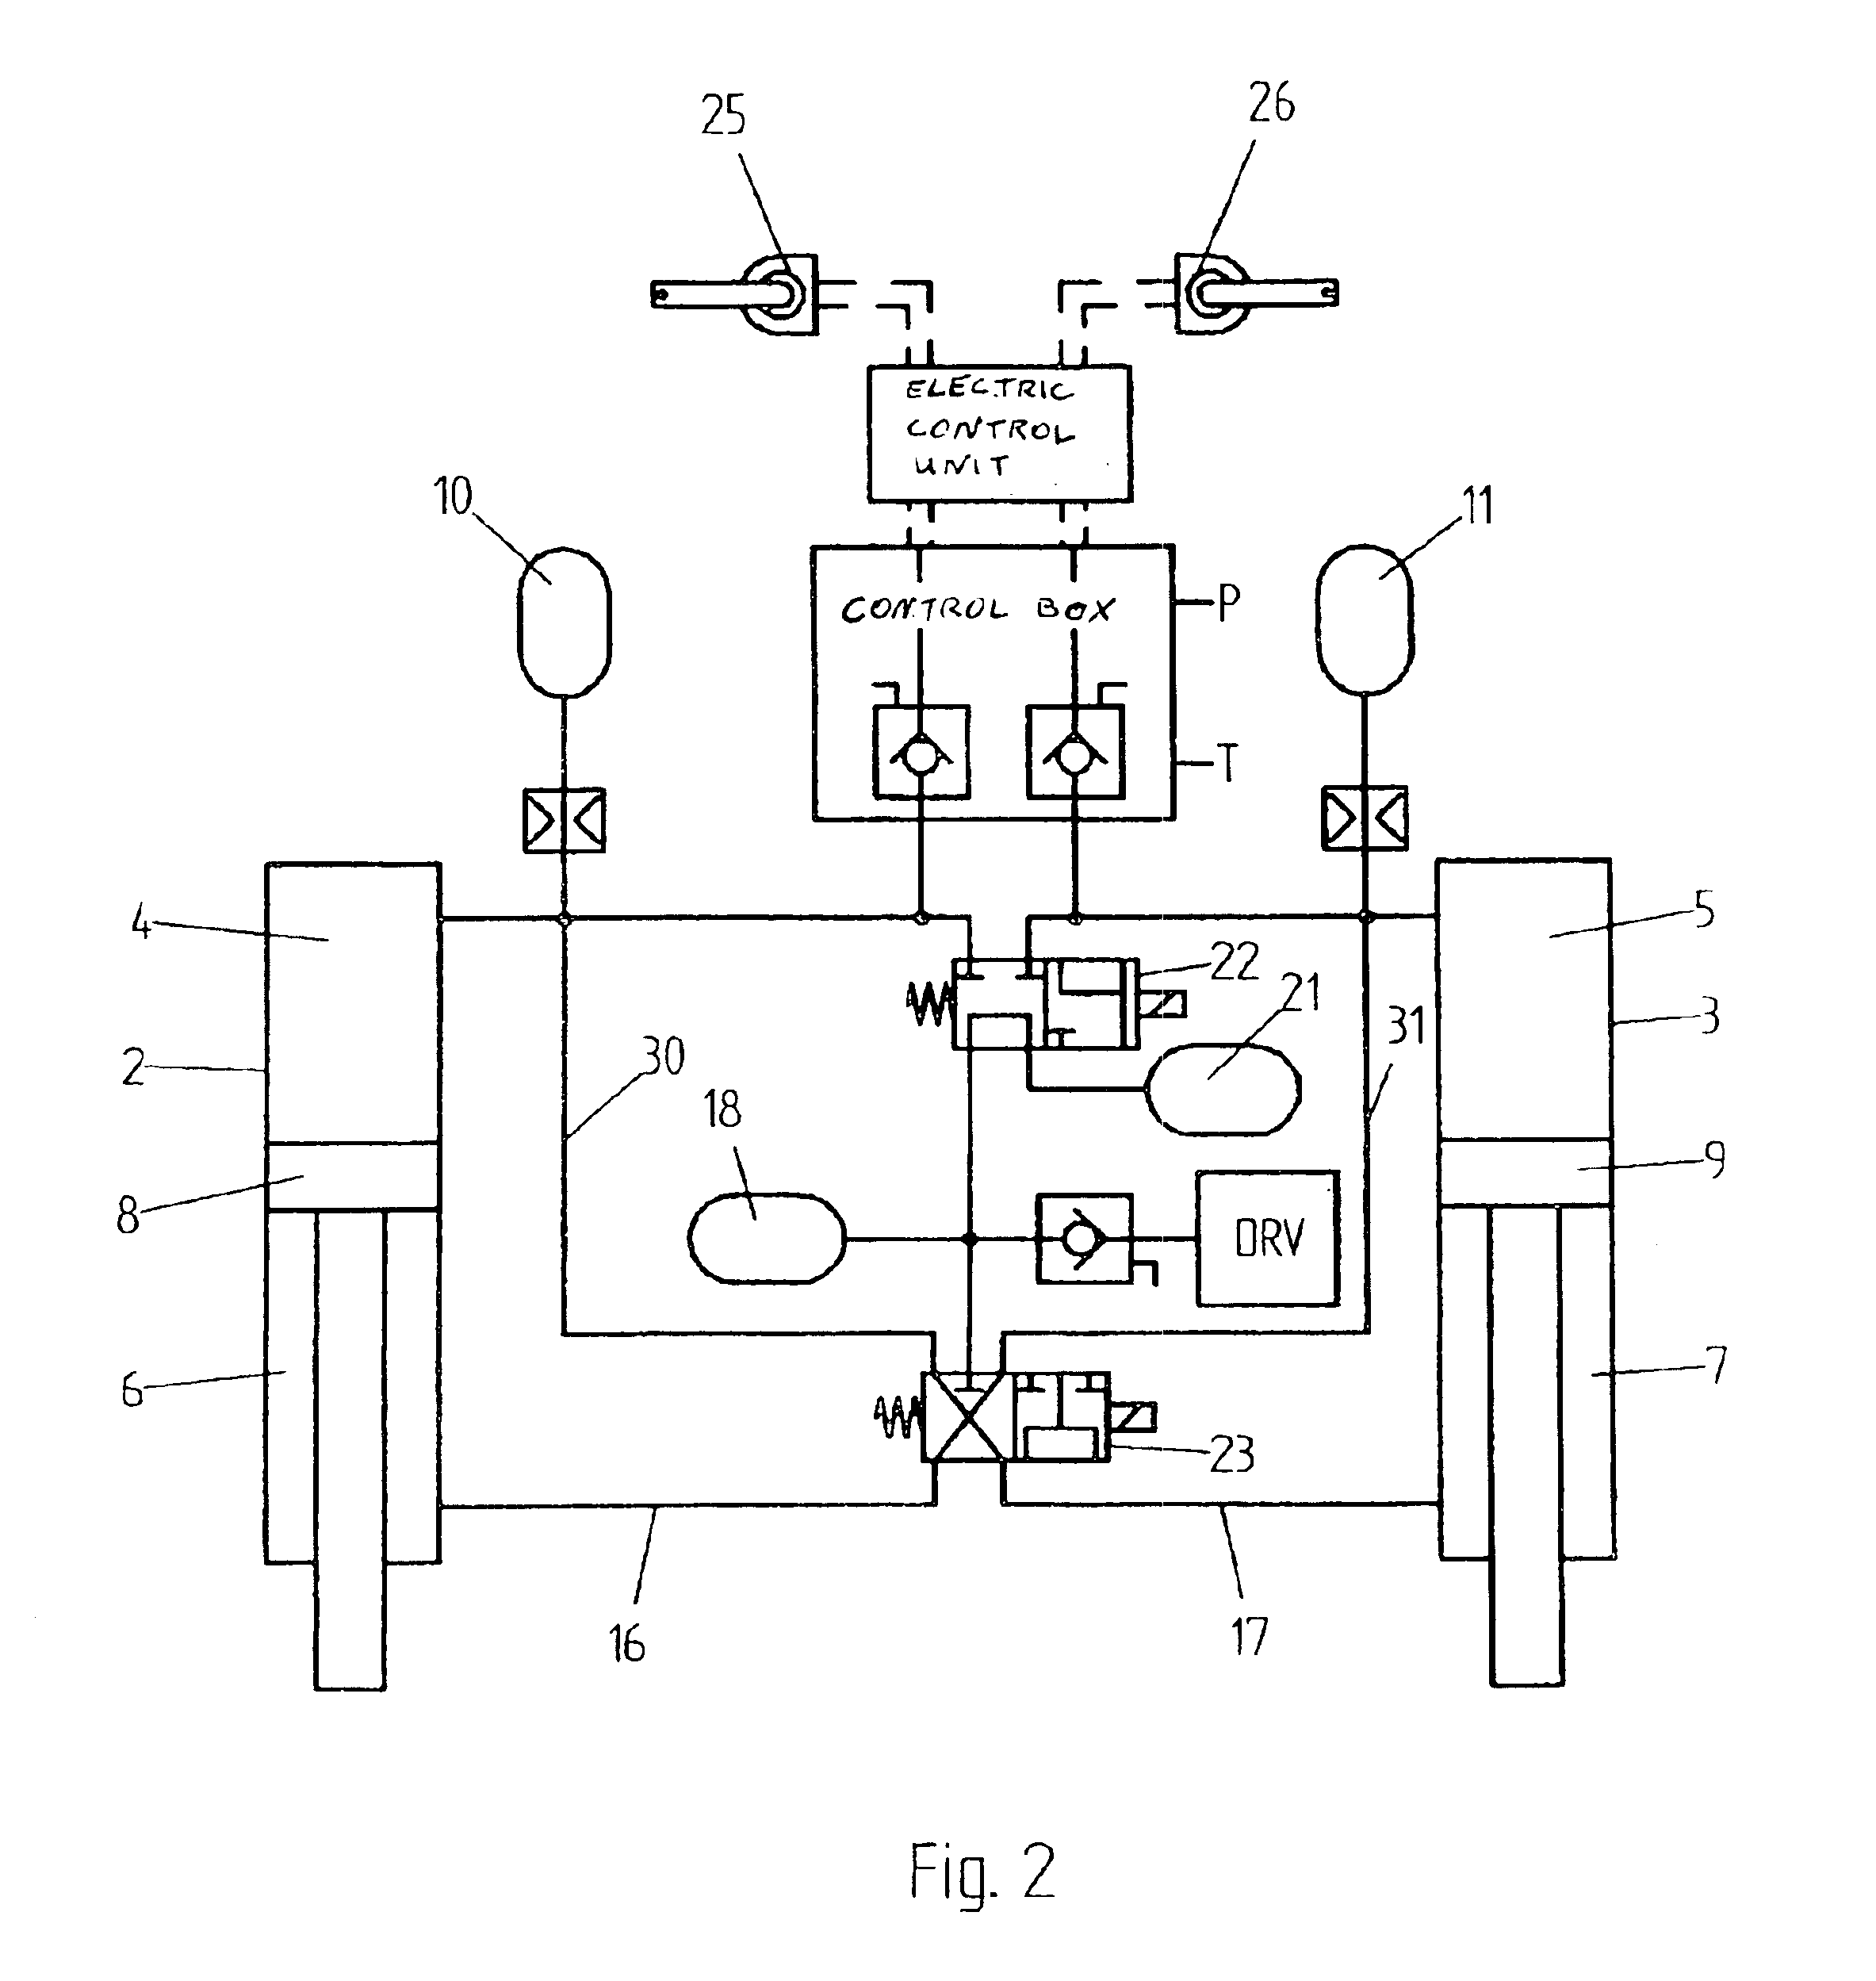 Hydropneumatic, level-regulated axle suspension on vehicles, in particular for full-suspension vehicles